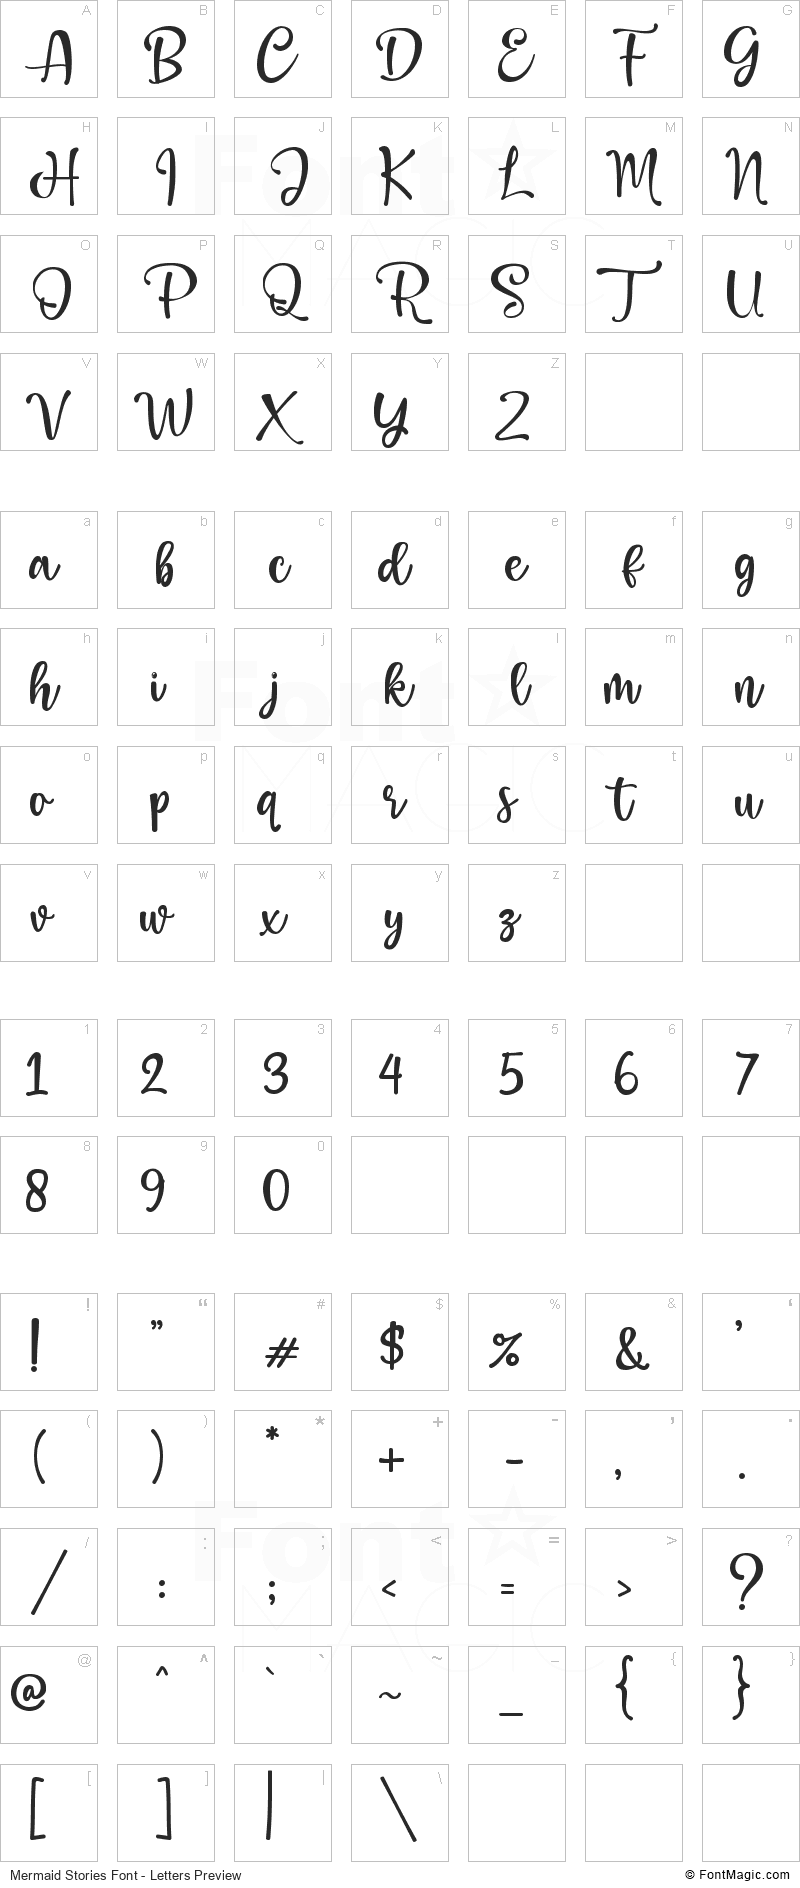 Mermaid Stories Font - All Latters Preview Chart